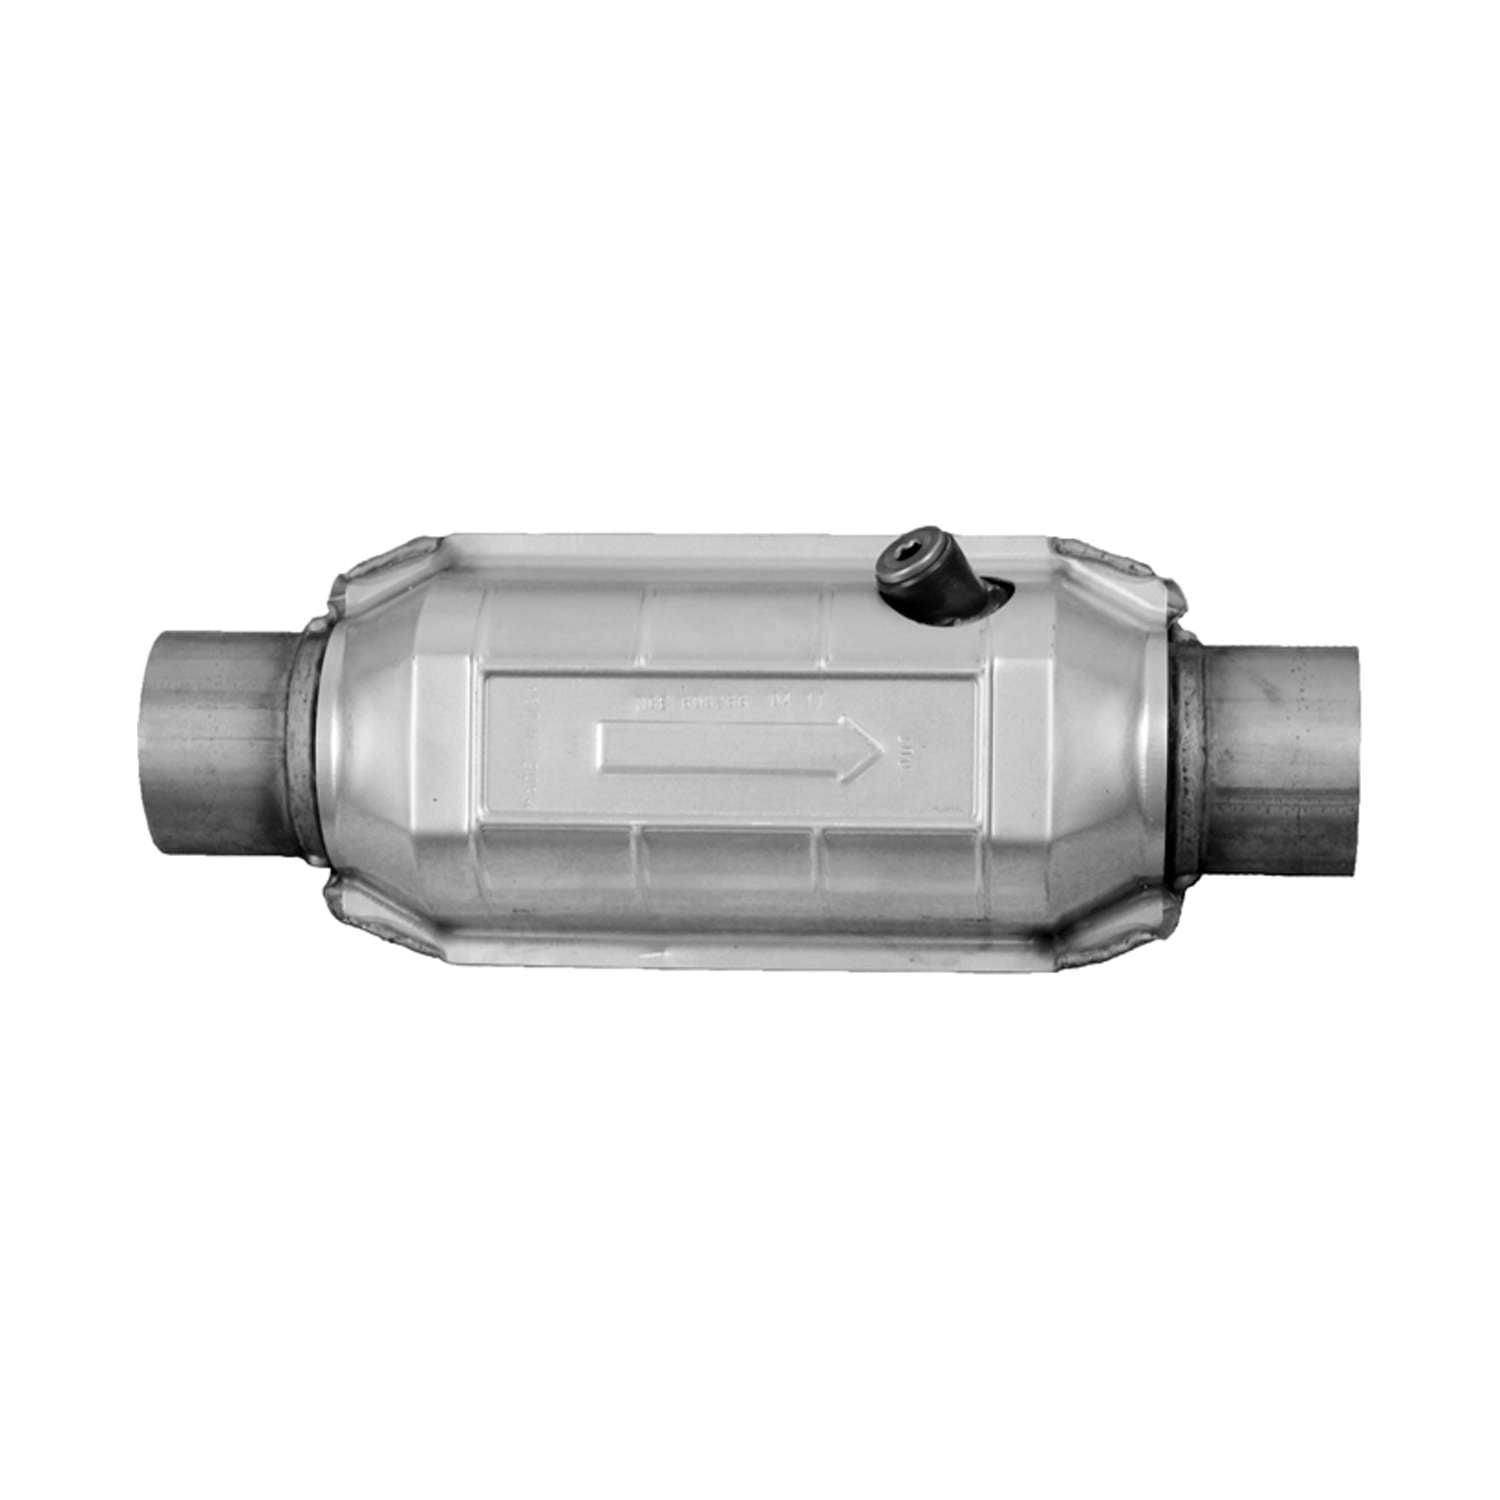 EPA Catalytic Converter Direct Fit Catco 4046 Federal 